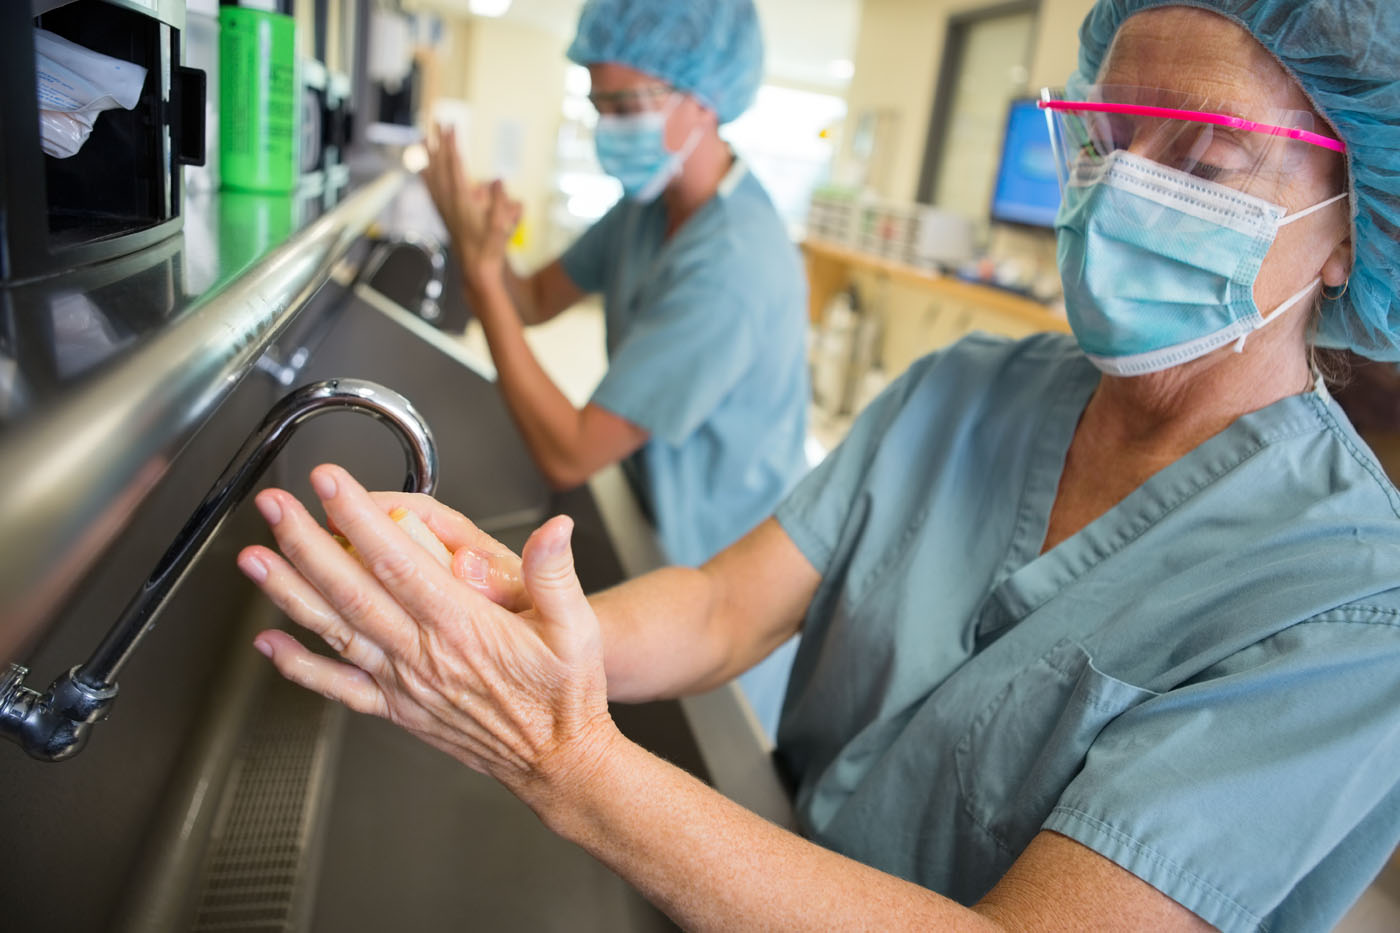 Better Communication and Teamwork Improve Sterile Processing Efficiency